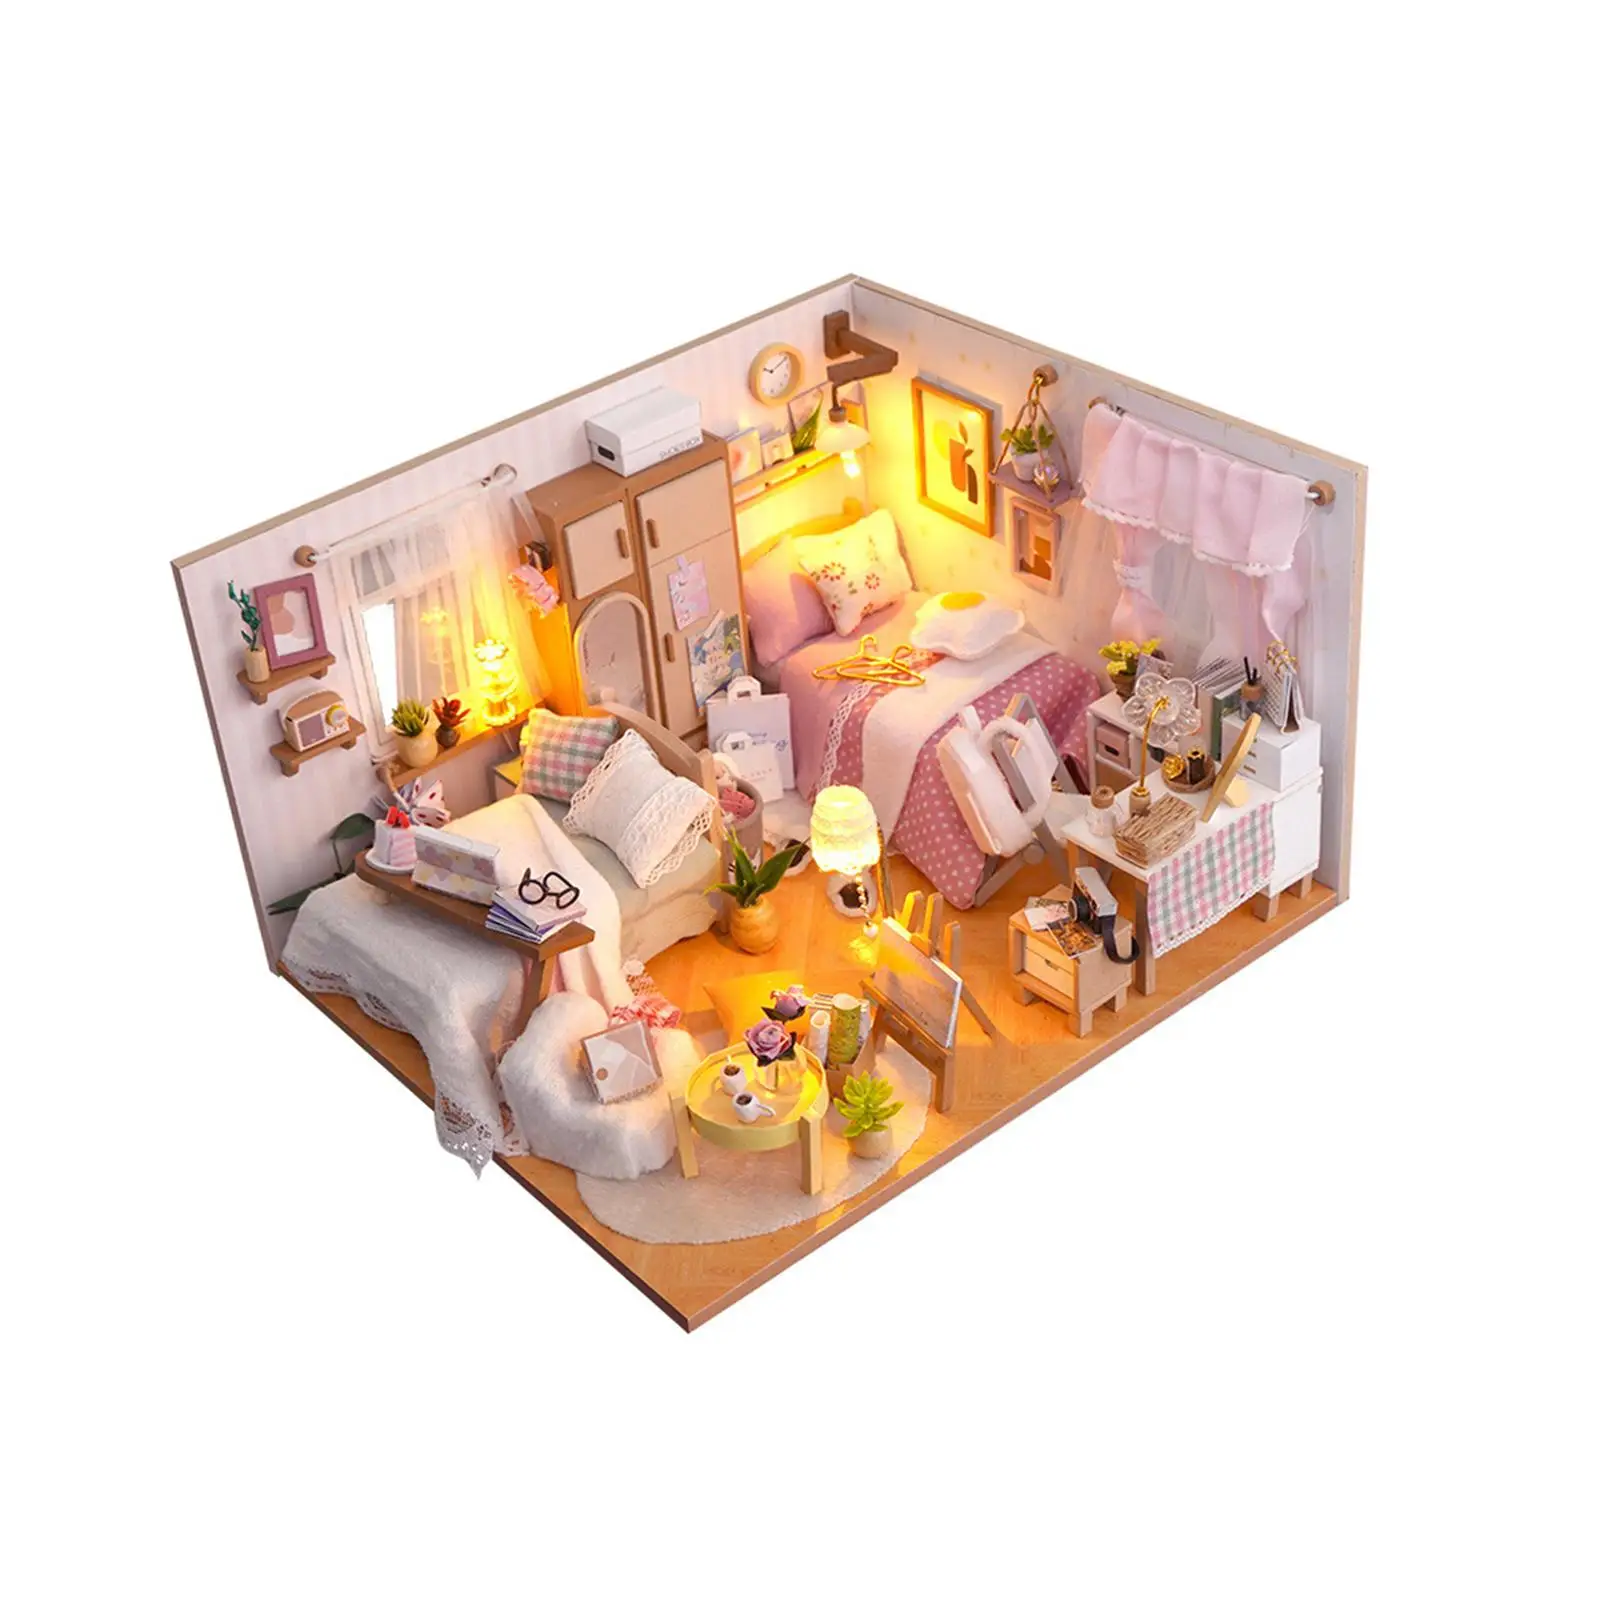 3D Wooden Miniature Dollhouse Kits with Furniture and Ornaments for Boys Girls Artwork Easy to Assemble Fashion Creative Bedroom